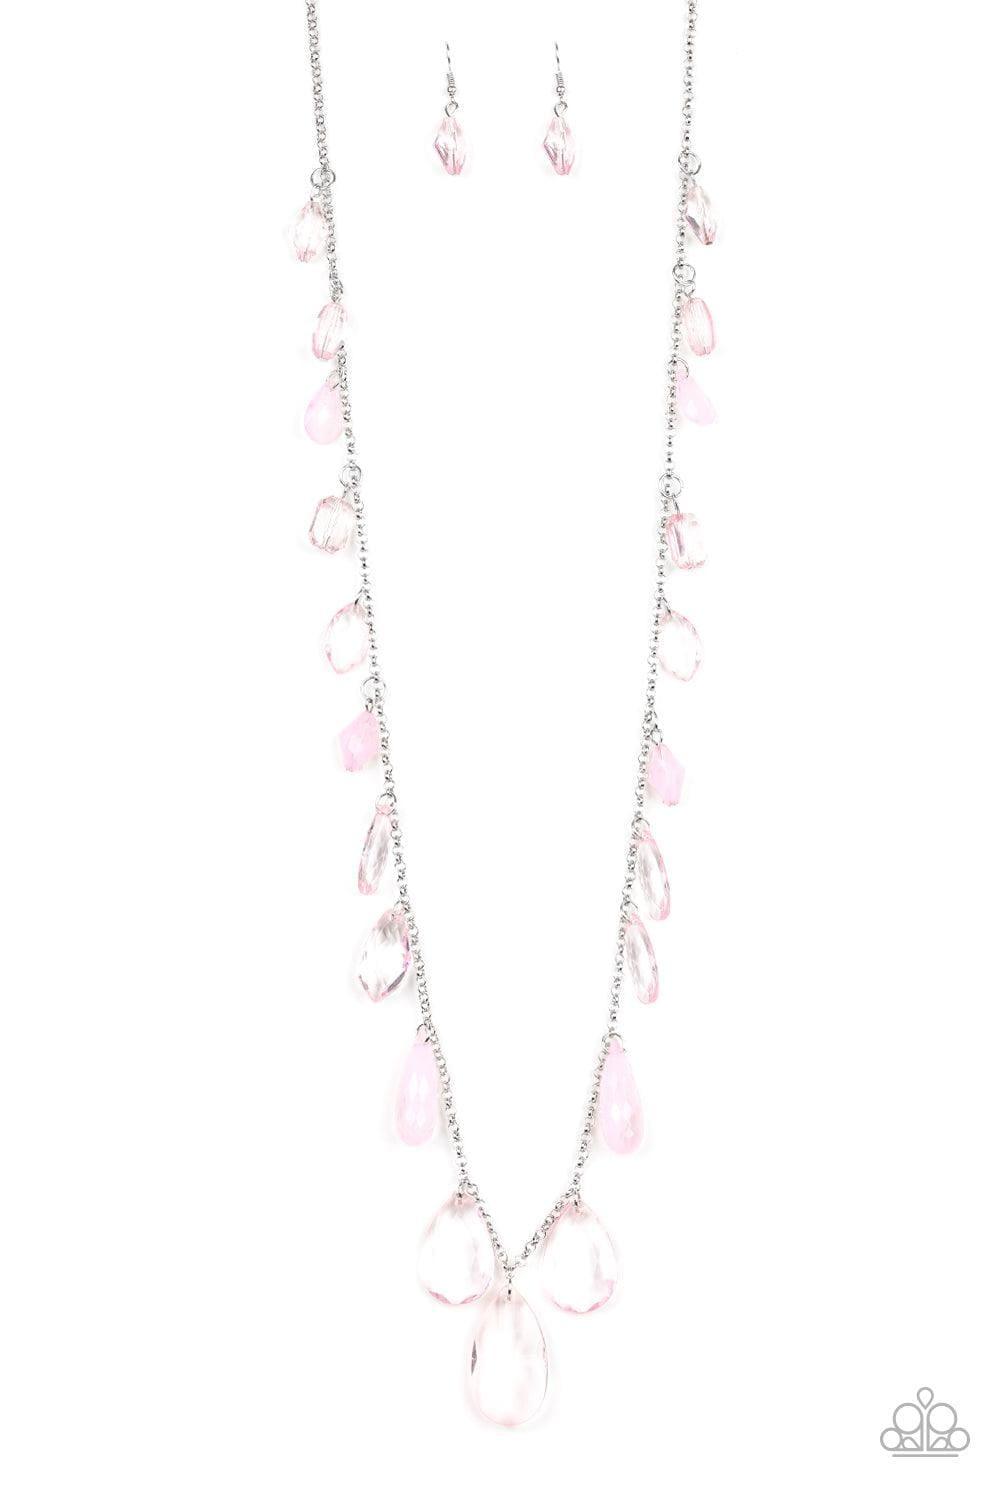 Paparazzi Accessories - Glow And Steady Wins The Race - Pink Necklace - Bling by JessieK